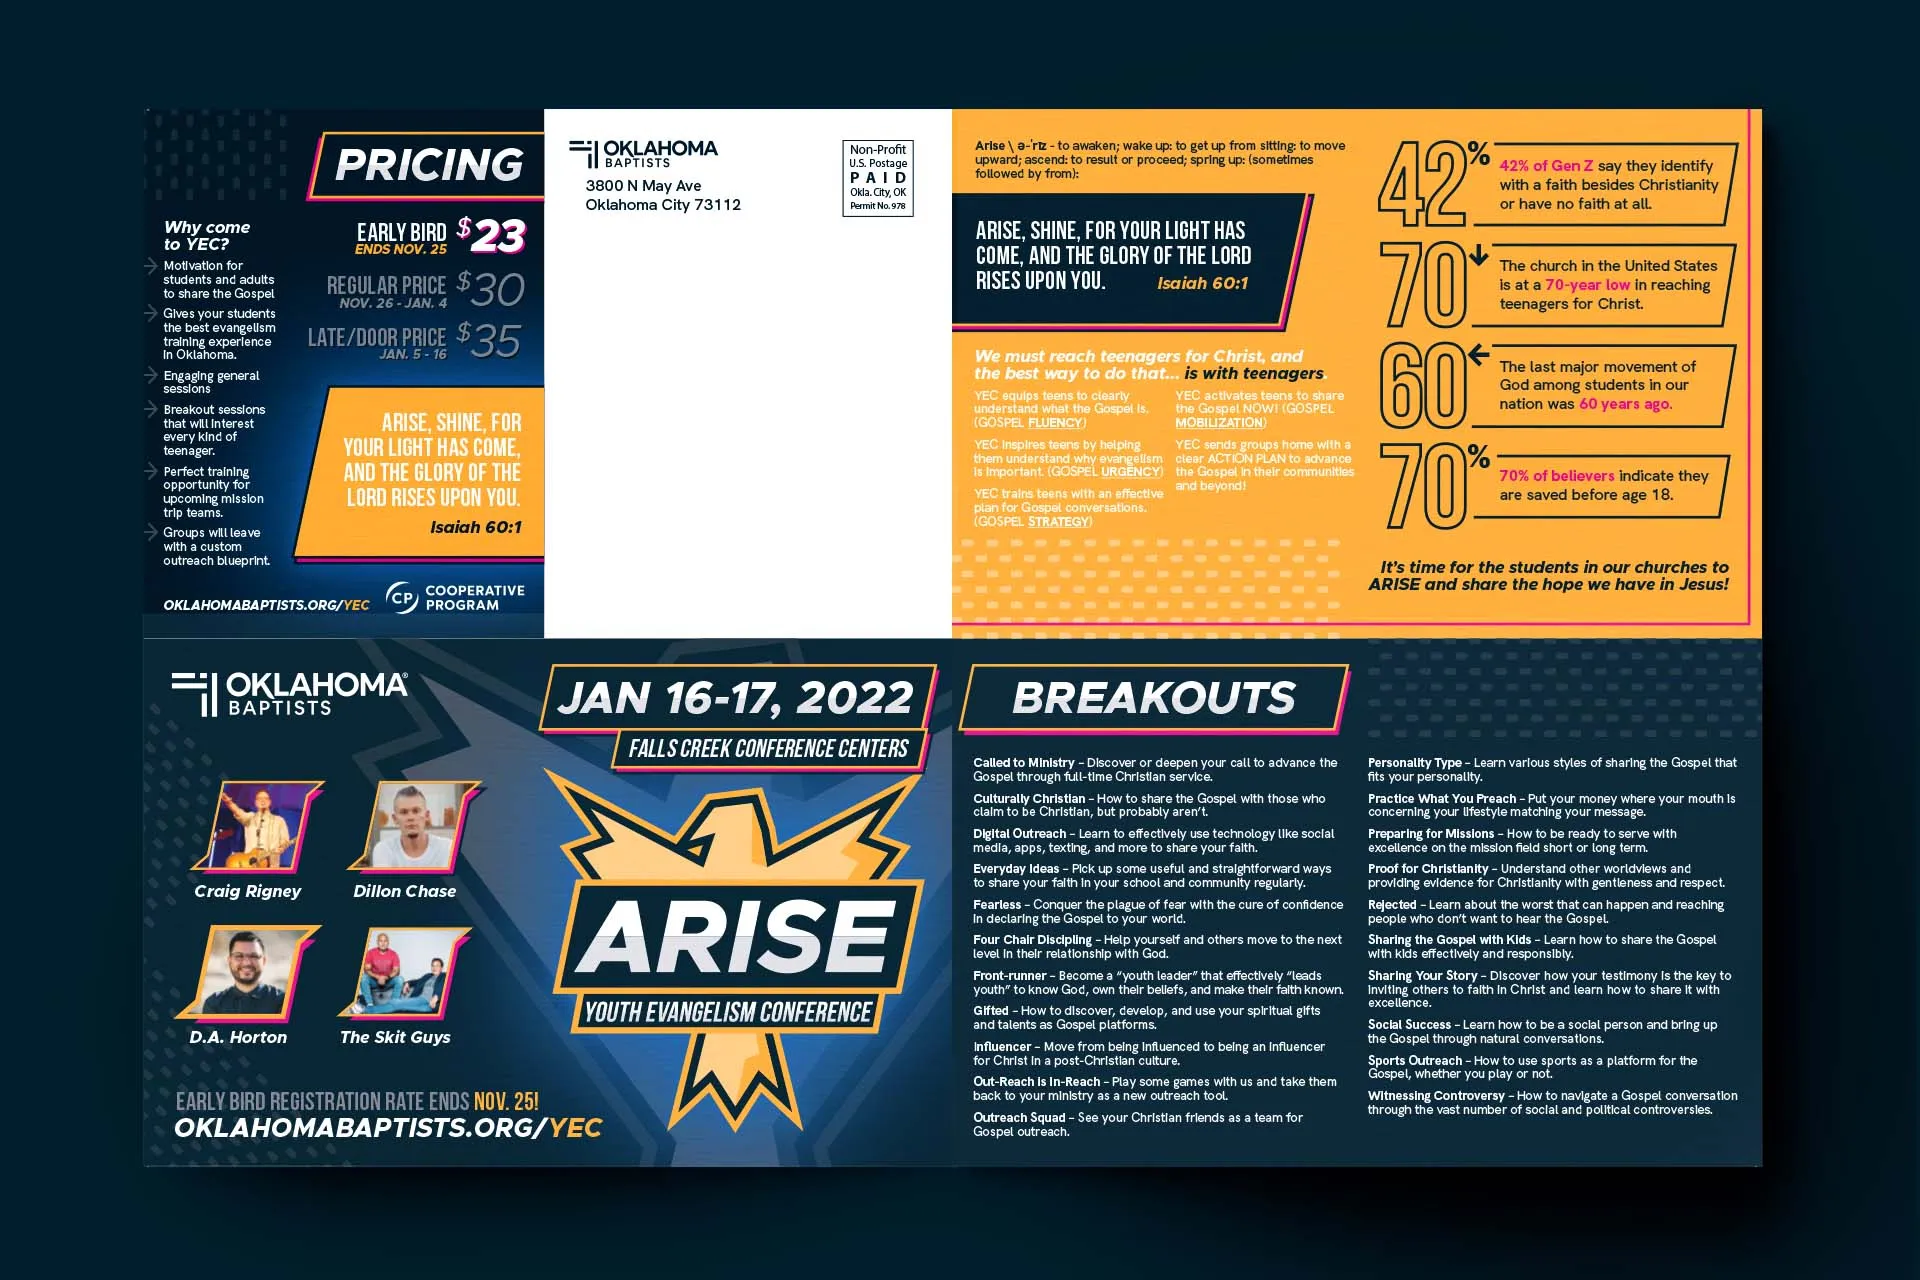 The back of the poster mailer with details about registration and pricing.